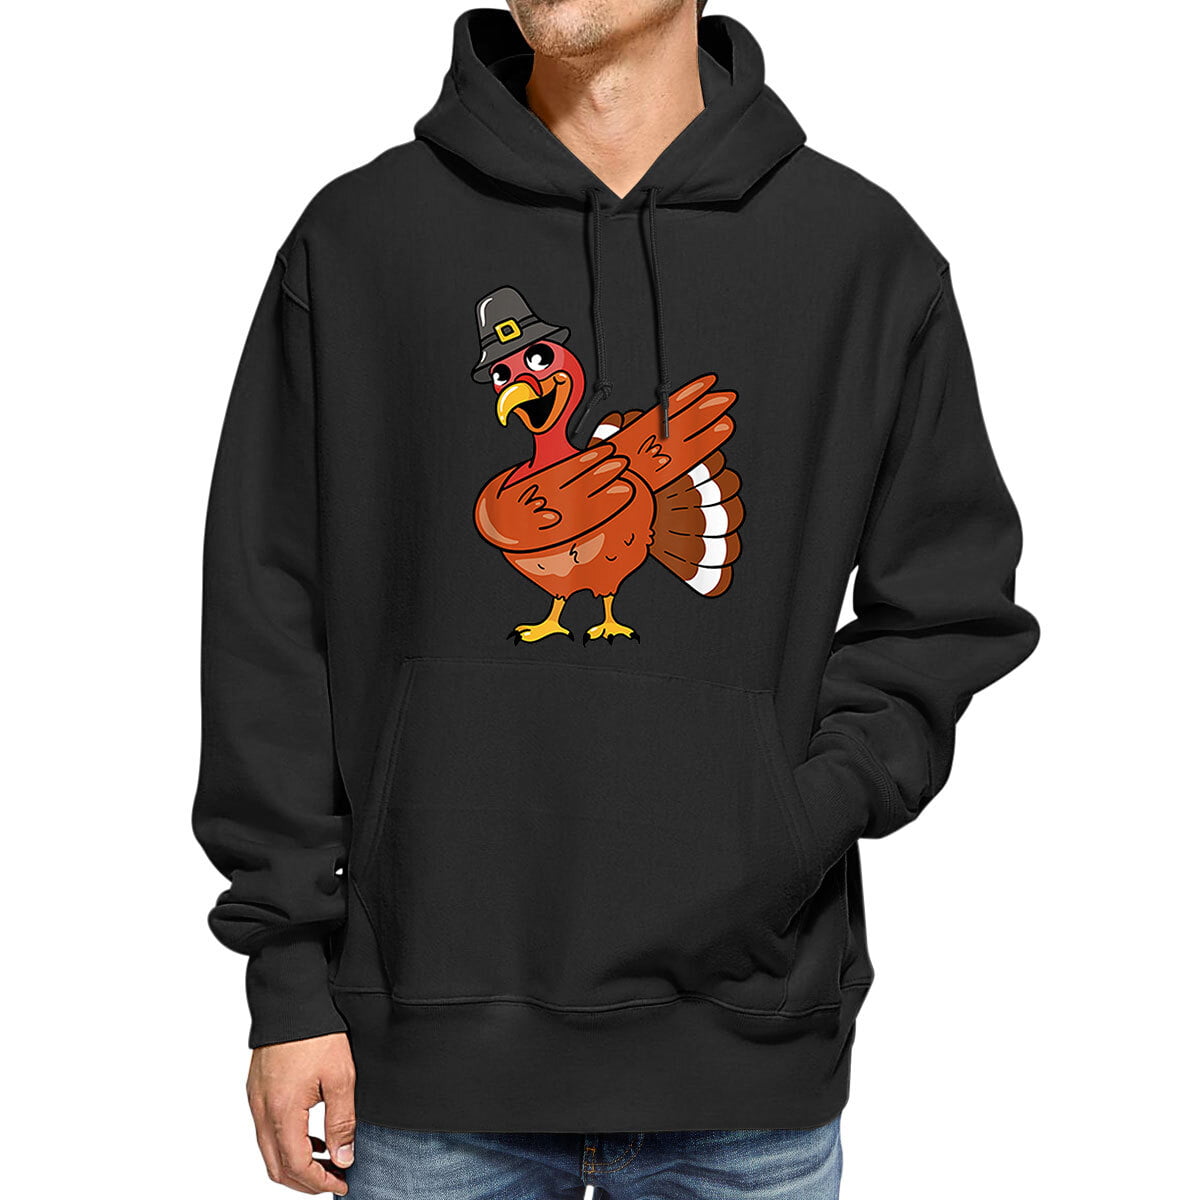 Thanksgiving Day Turkey Womens Long Sleeve Pullover Hooded Sweatshirt Top Hoodie with Fleece Lining 